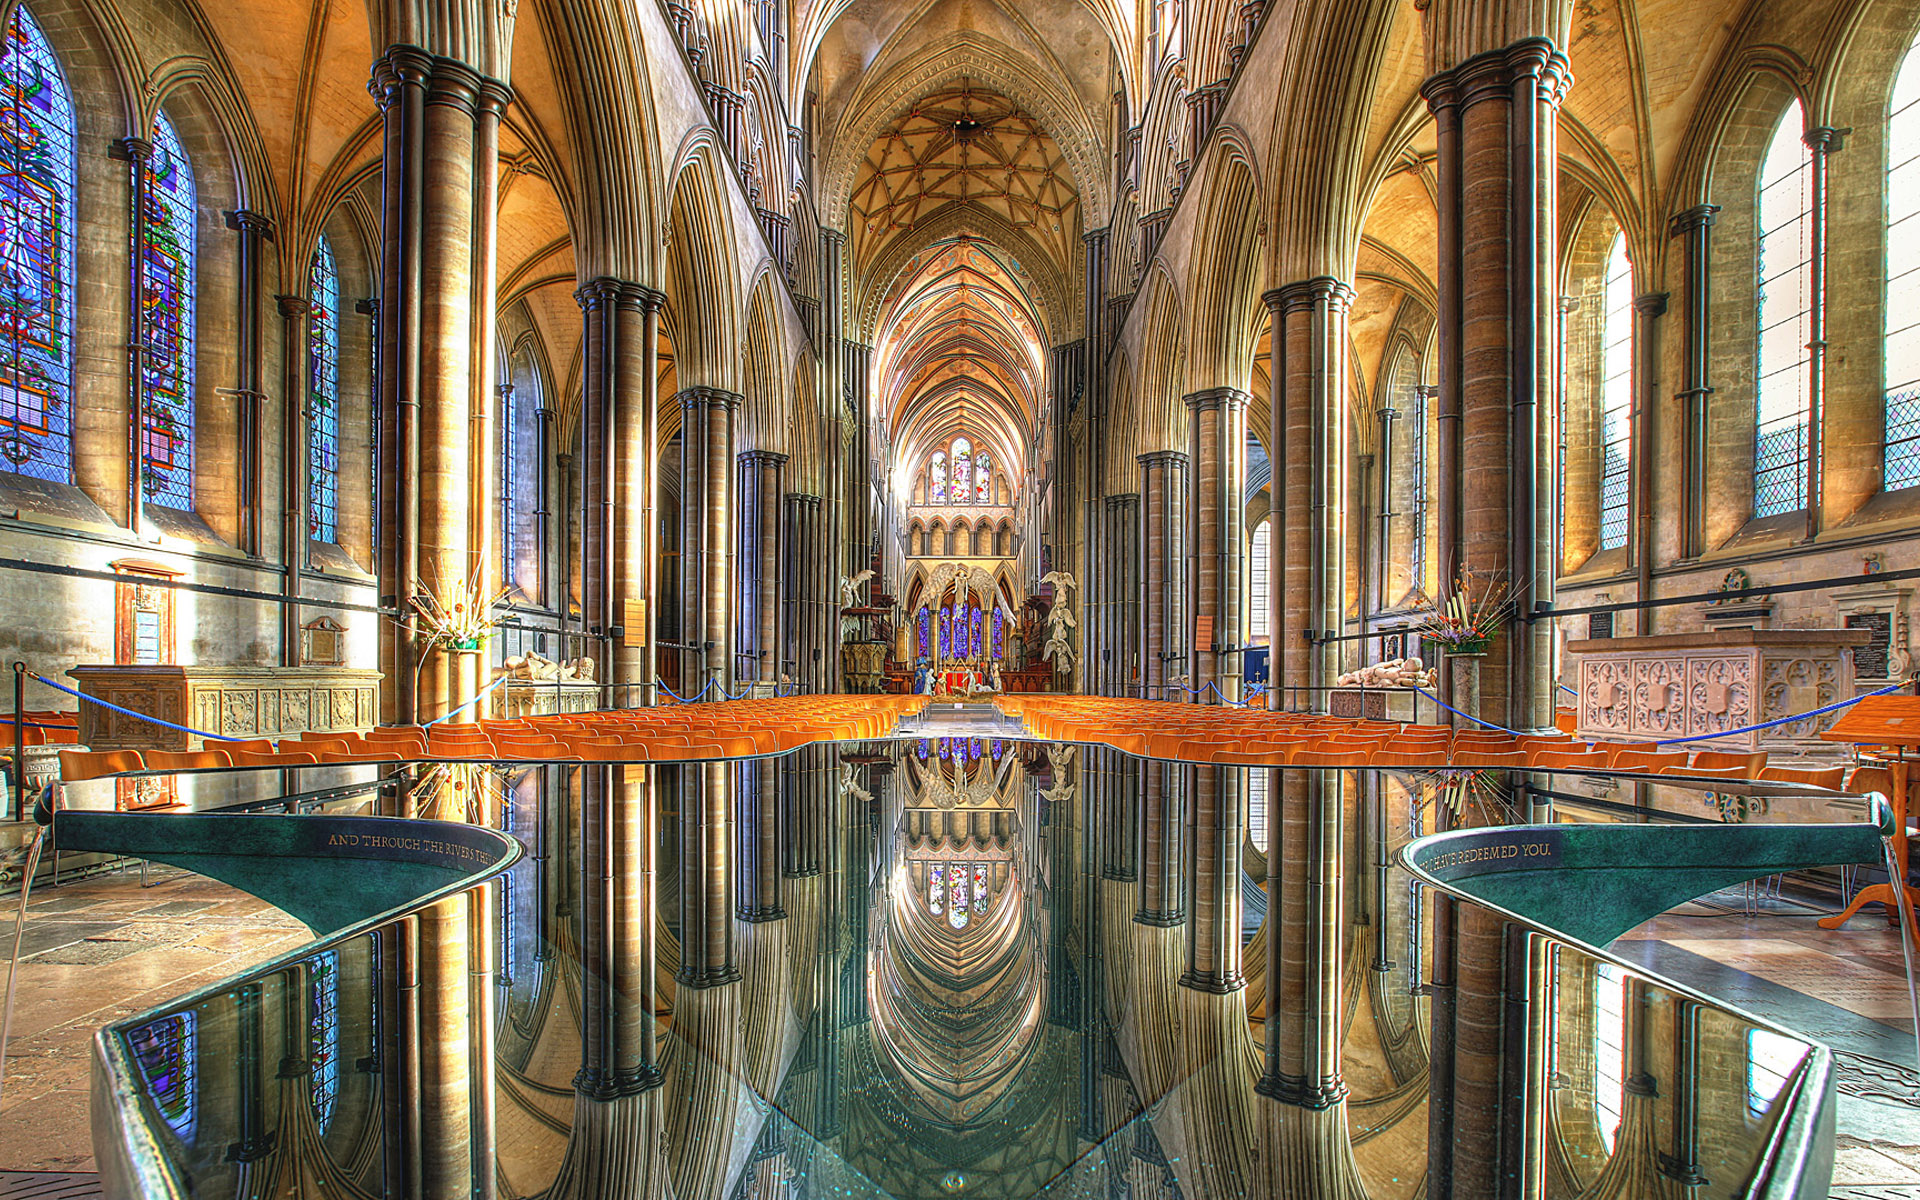 architecture, interior, reflection, religious, salisbury cathedral, arch, cathedral, silver, cathedrals